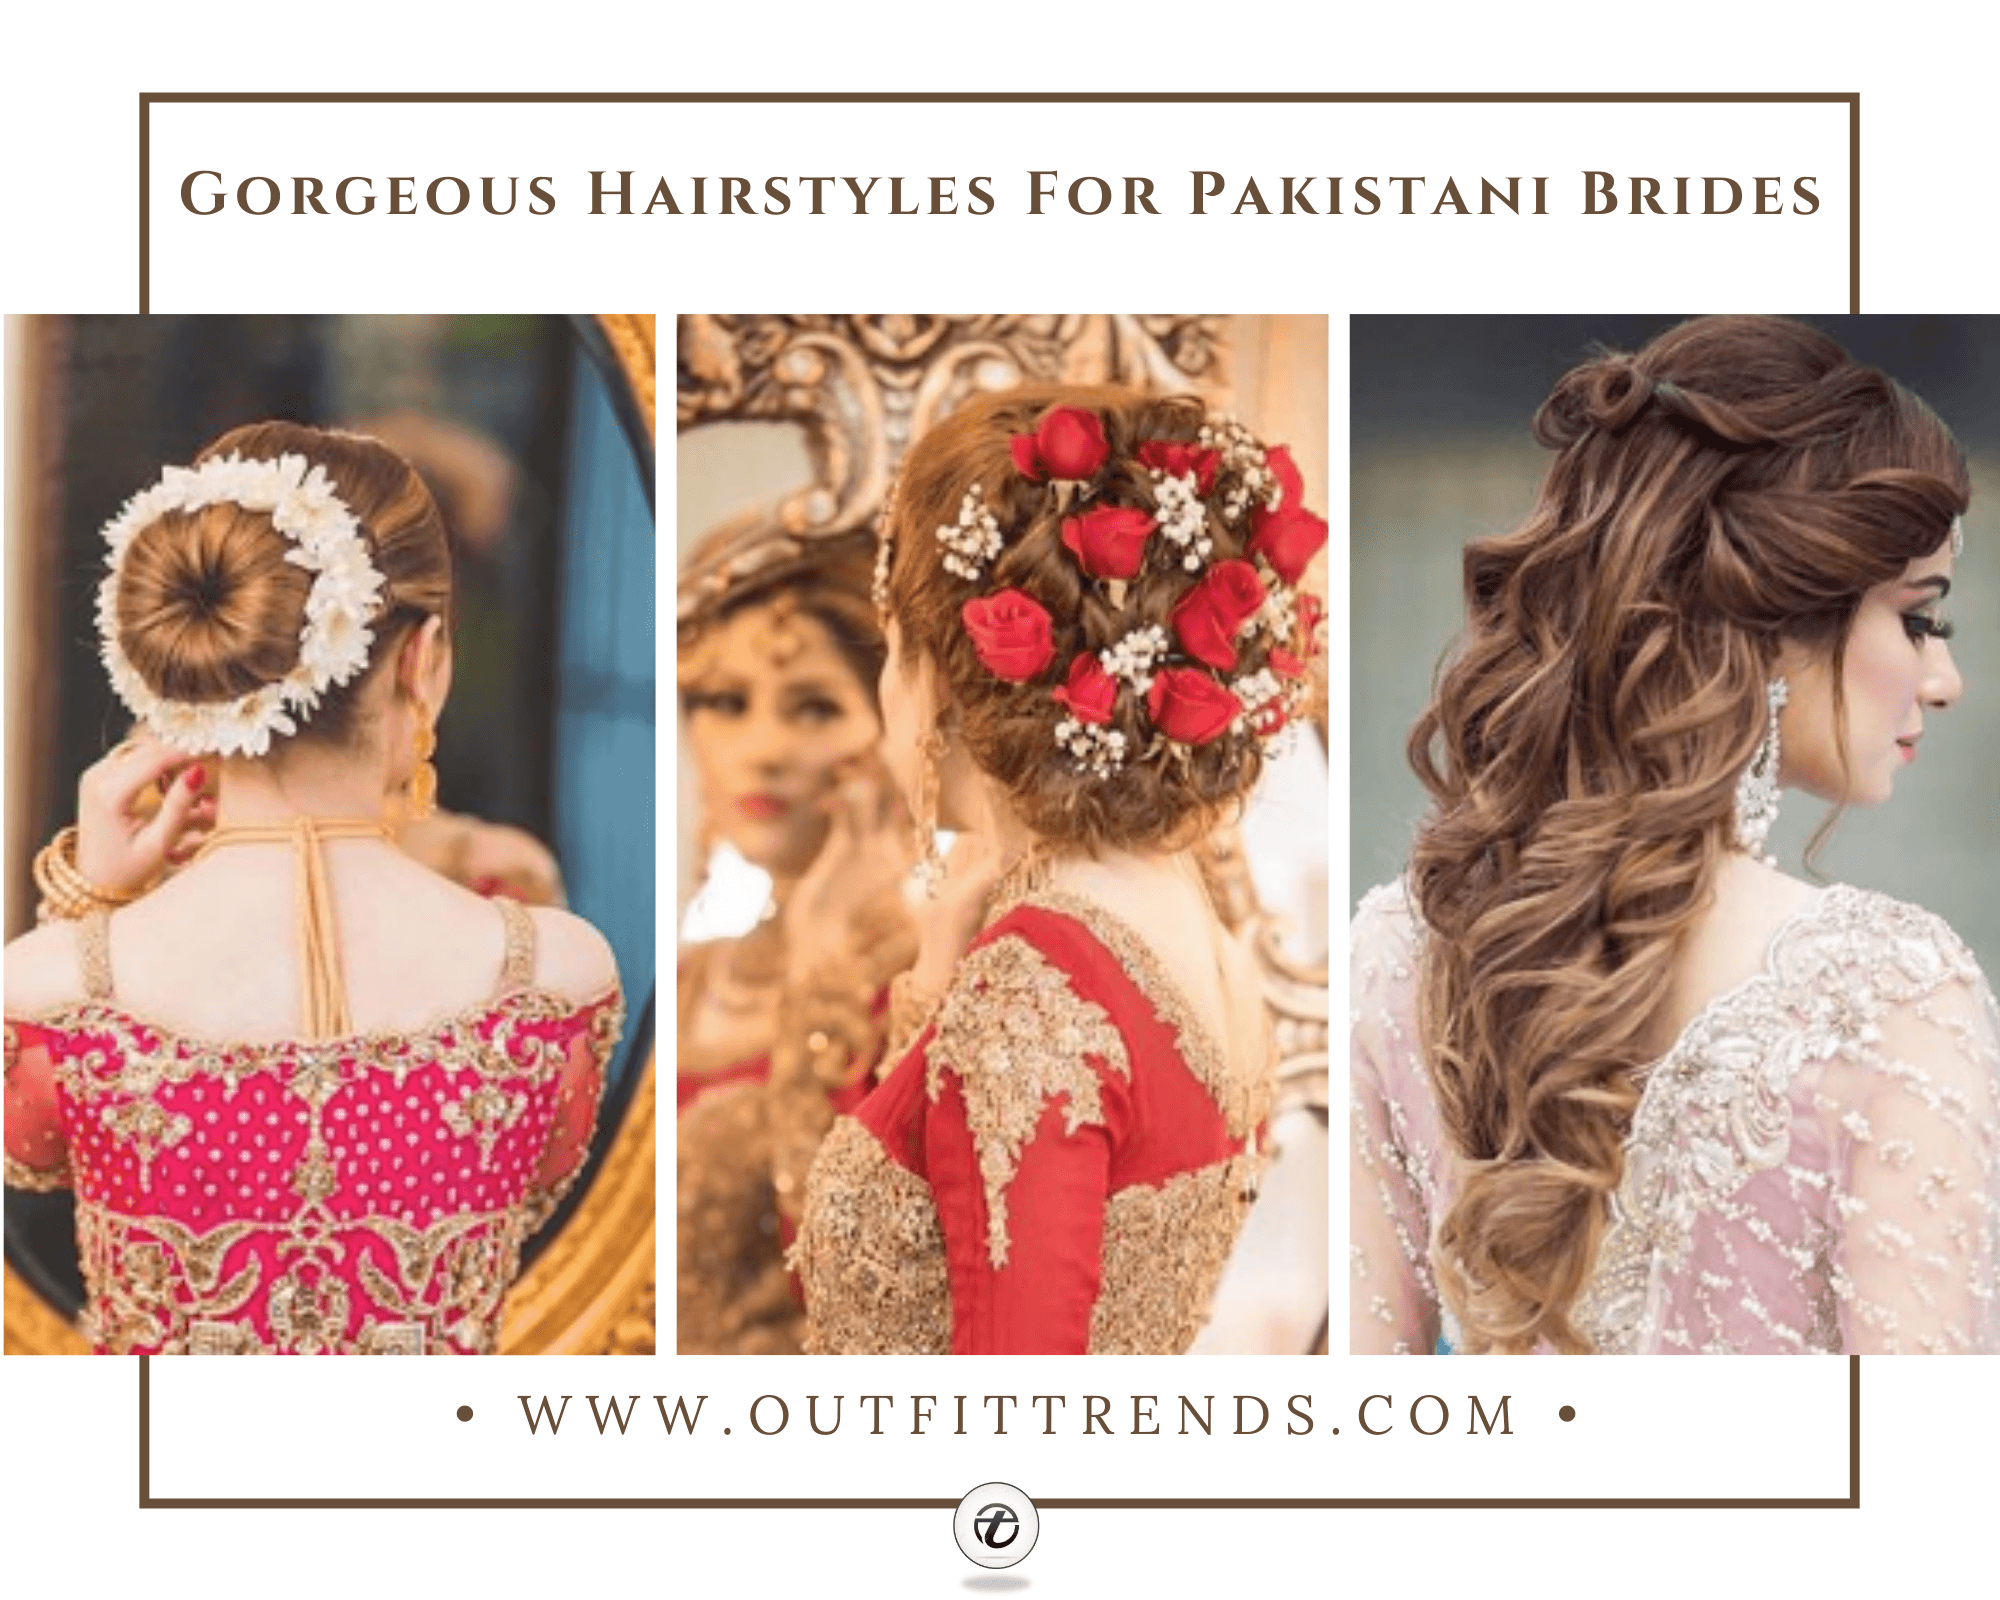 25 Pakistani Wedding Hairstyles & Hairdos For Your Big Day